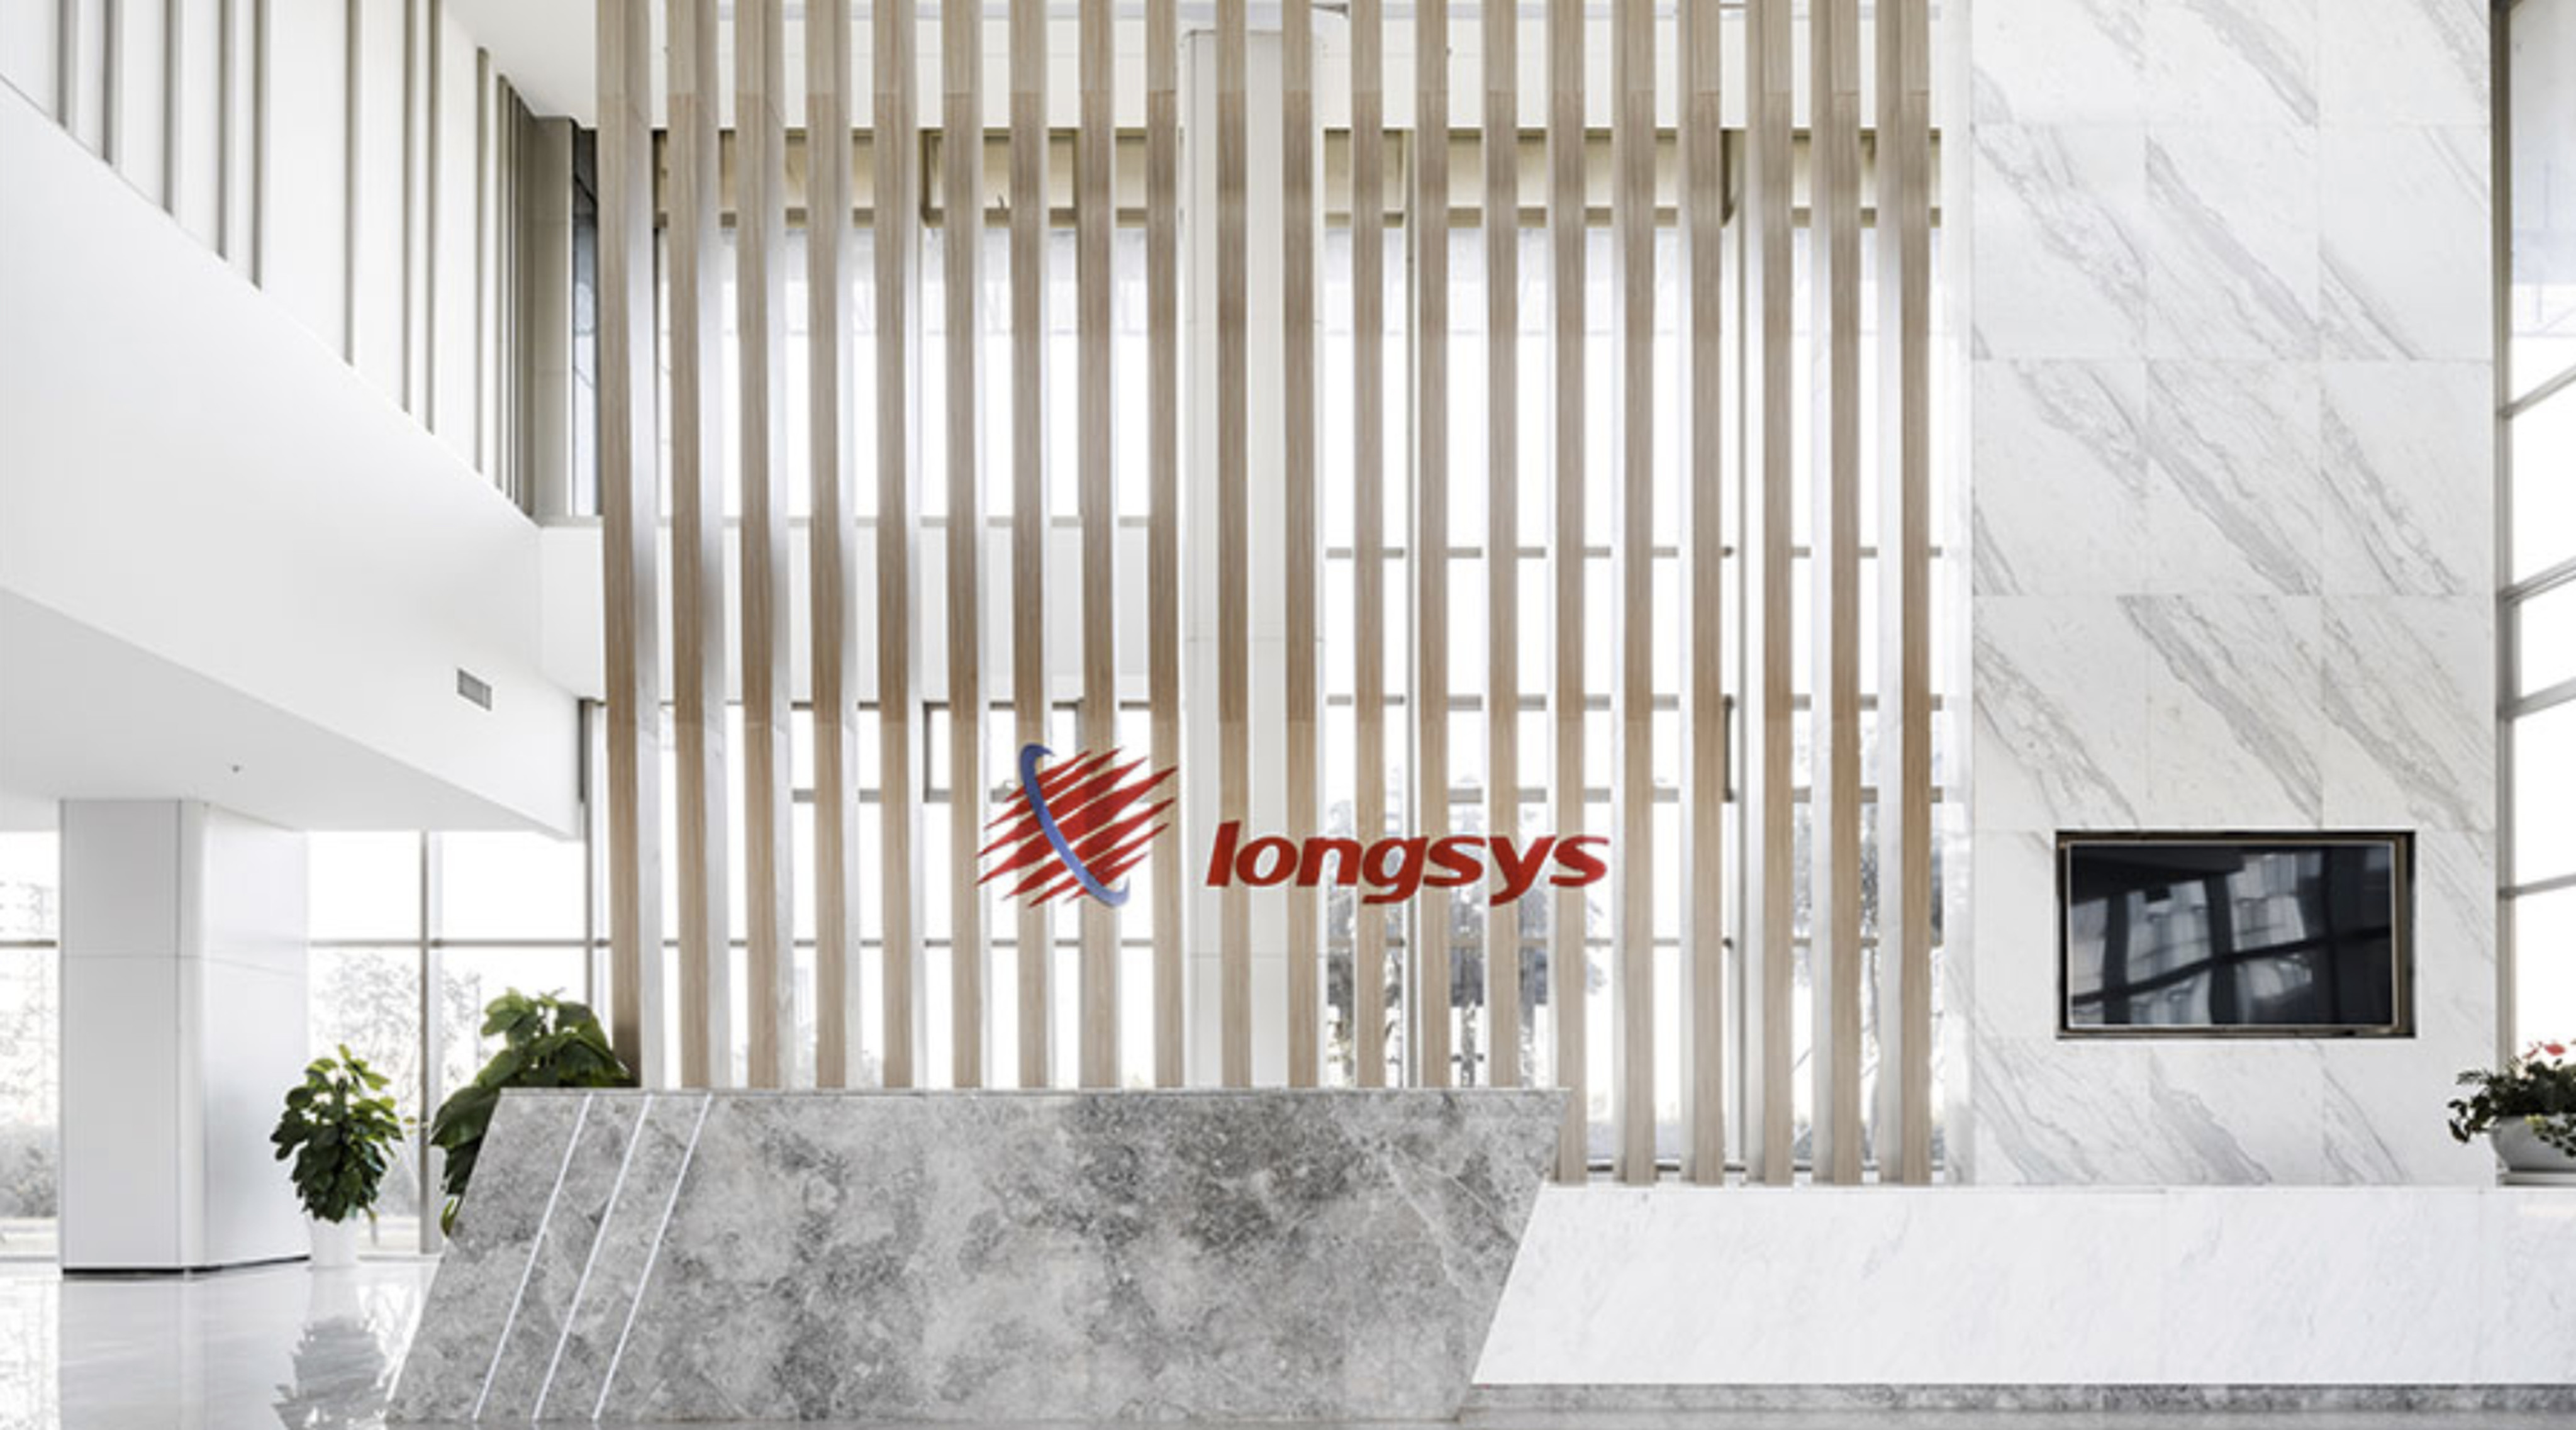 The latest corporate acquisition by Shenzhen Longsys Electronics reflects the continued initiatives by mainland Chinese tech firms to further develop the country’s position in the global semiconductor manufacturing supply chain. Photo: Handout